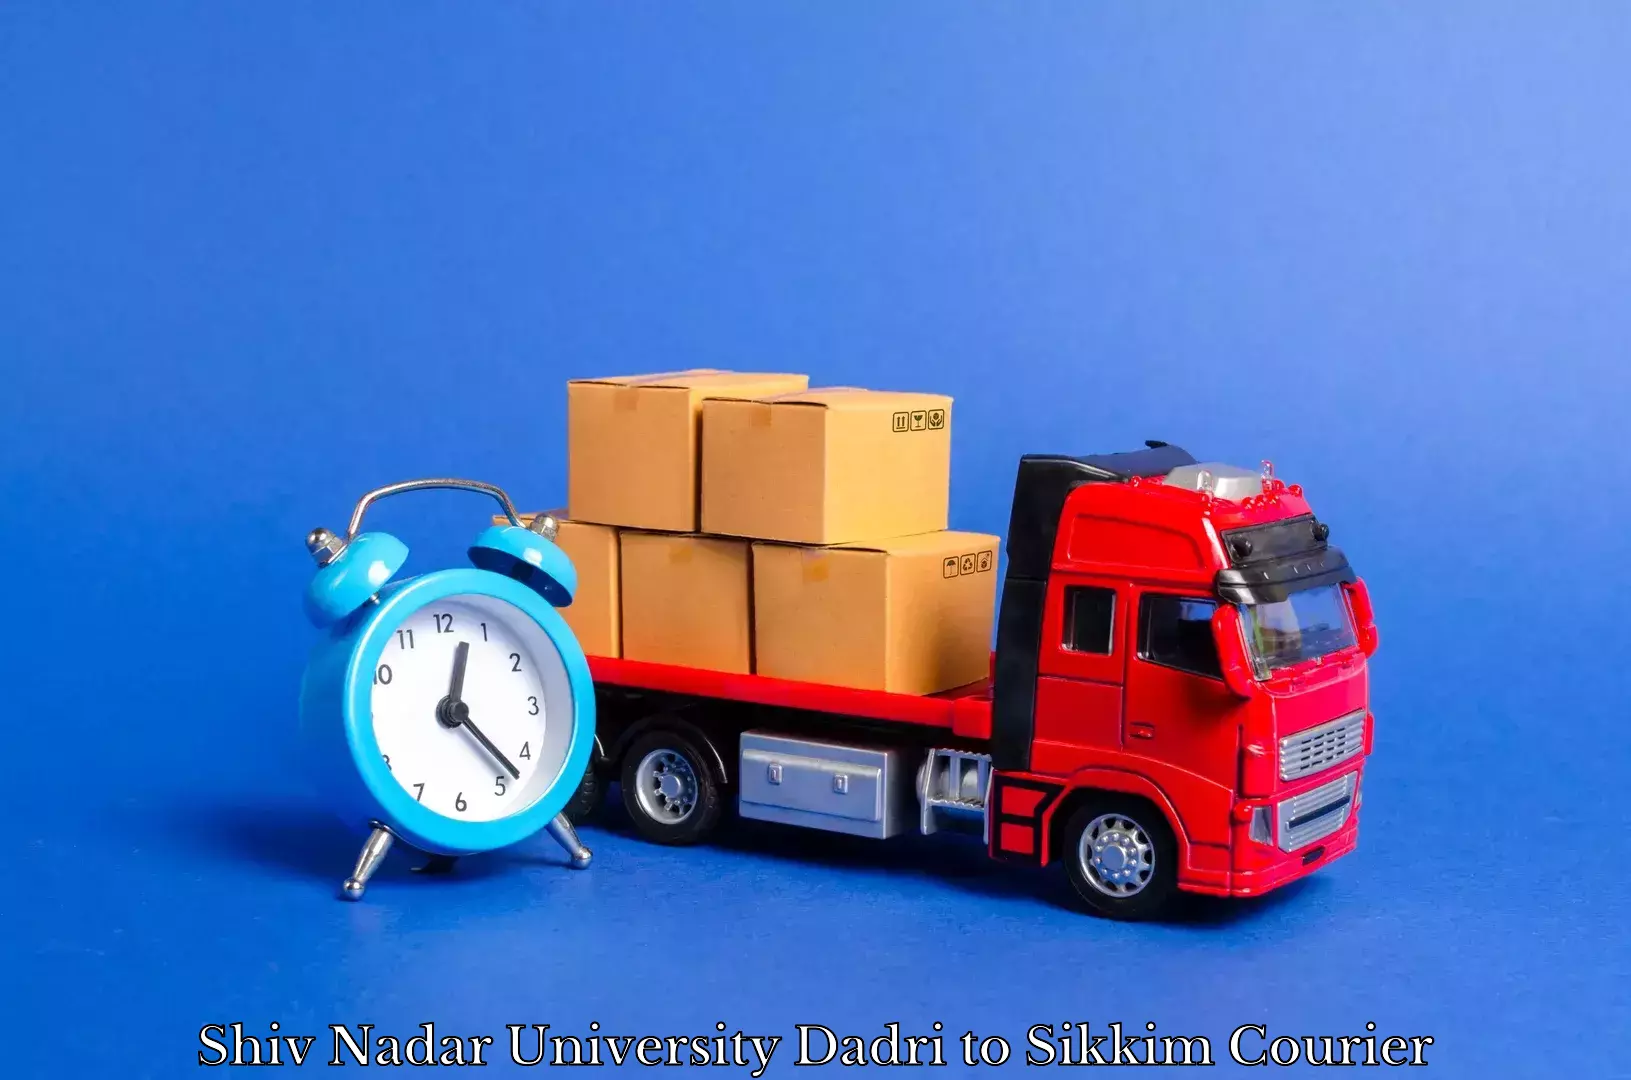 Tailored moving services Shiv Nadar University Dadri to Pelling